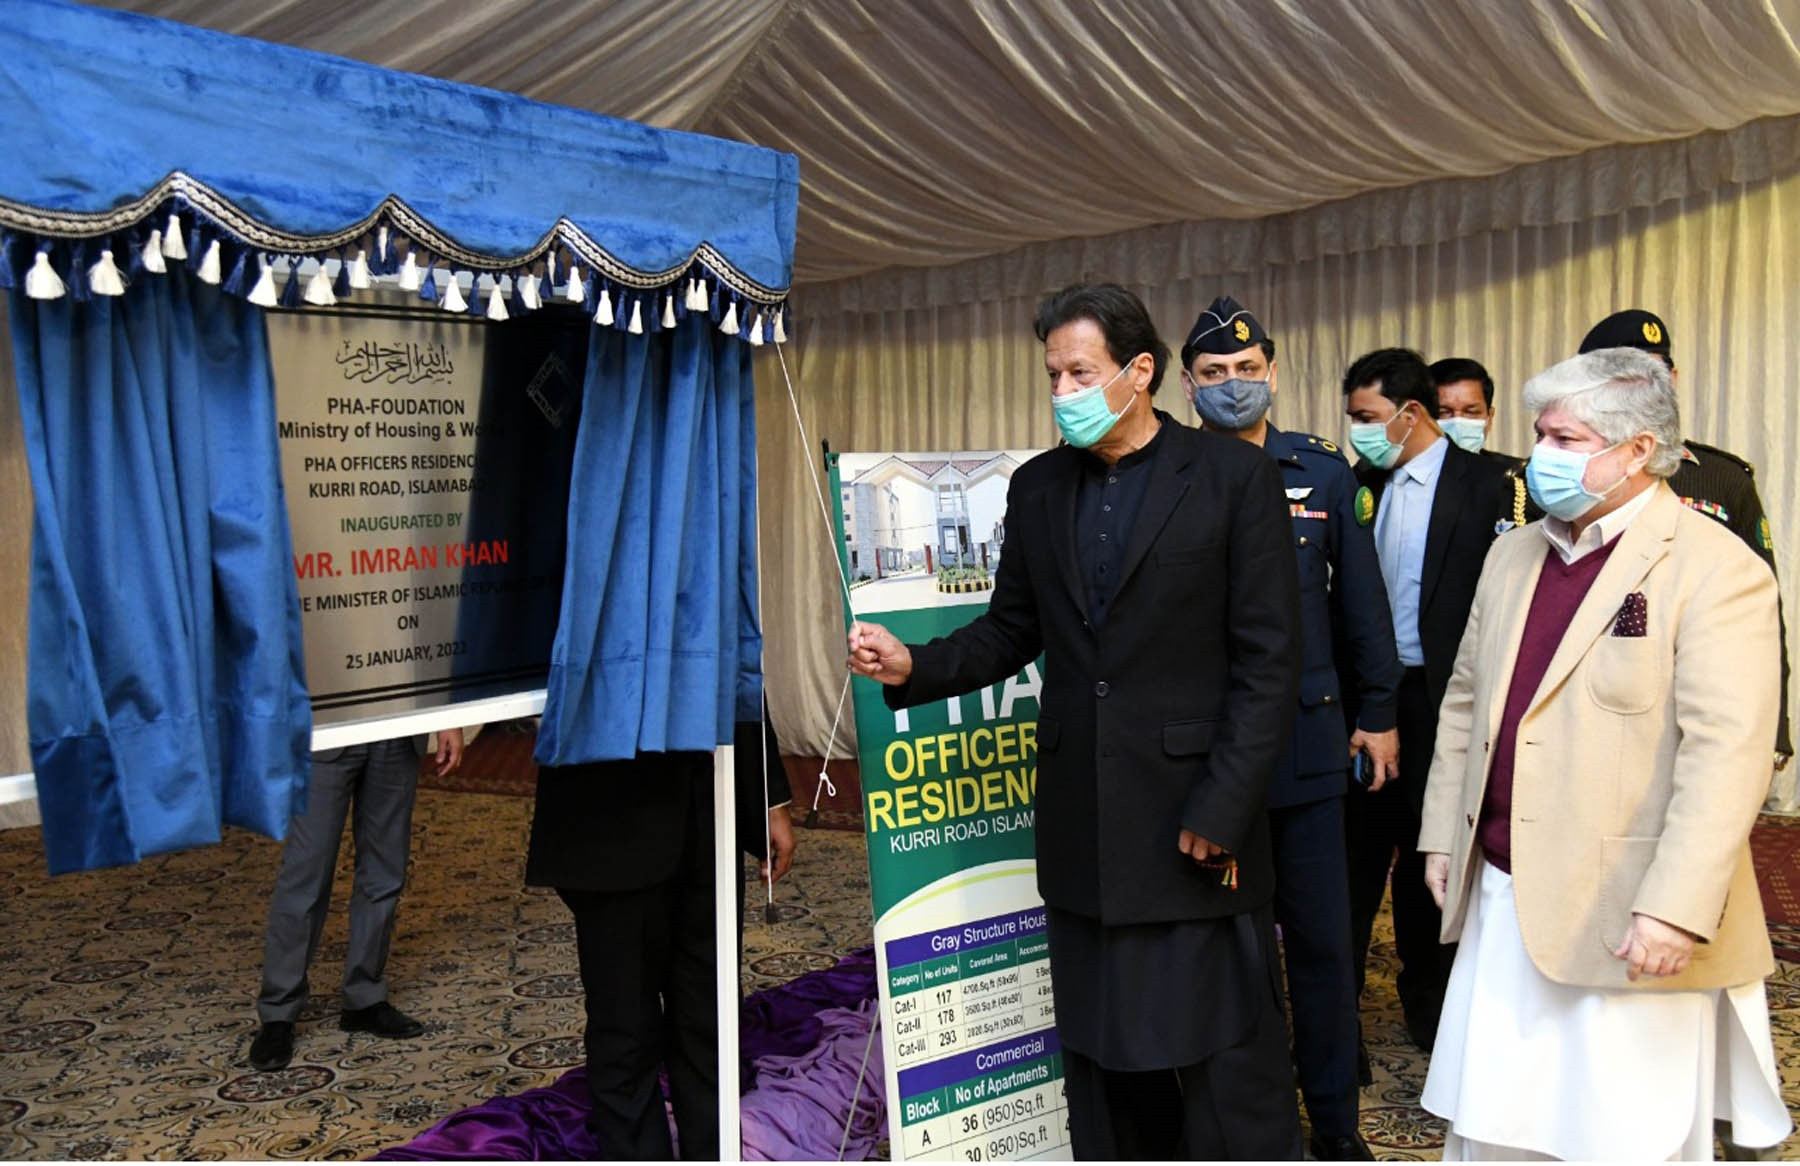 prime minister imran khan unveiling a plaque to inaugurate pha officers residentia kurri road and pha apartments in islamabad on january 25 2022 photo pid